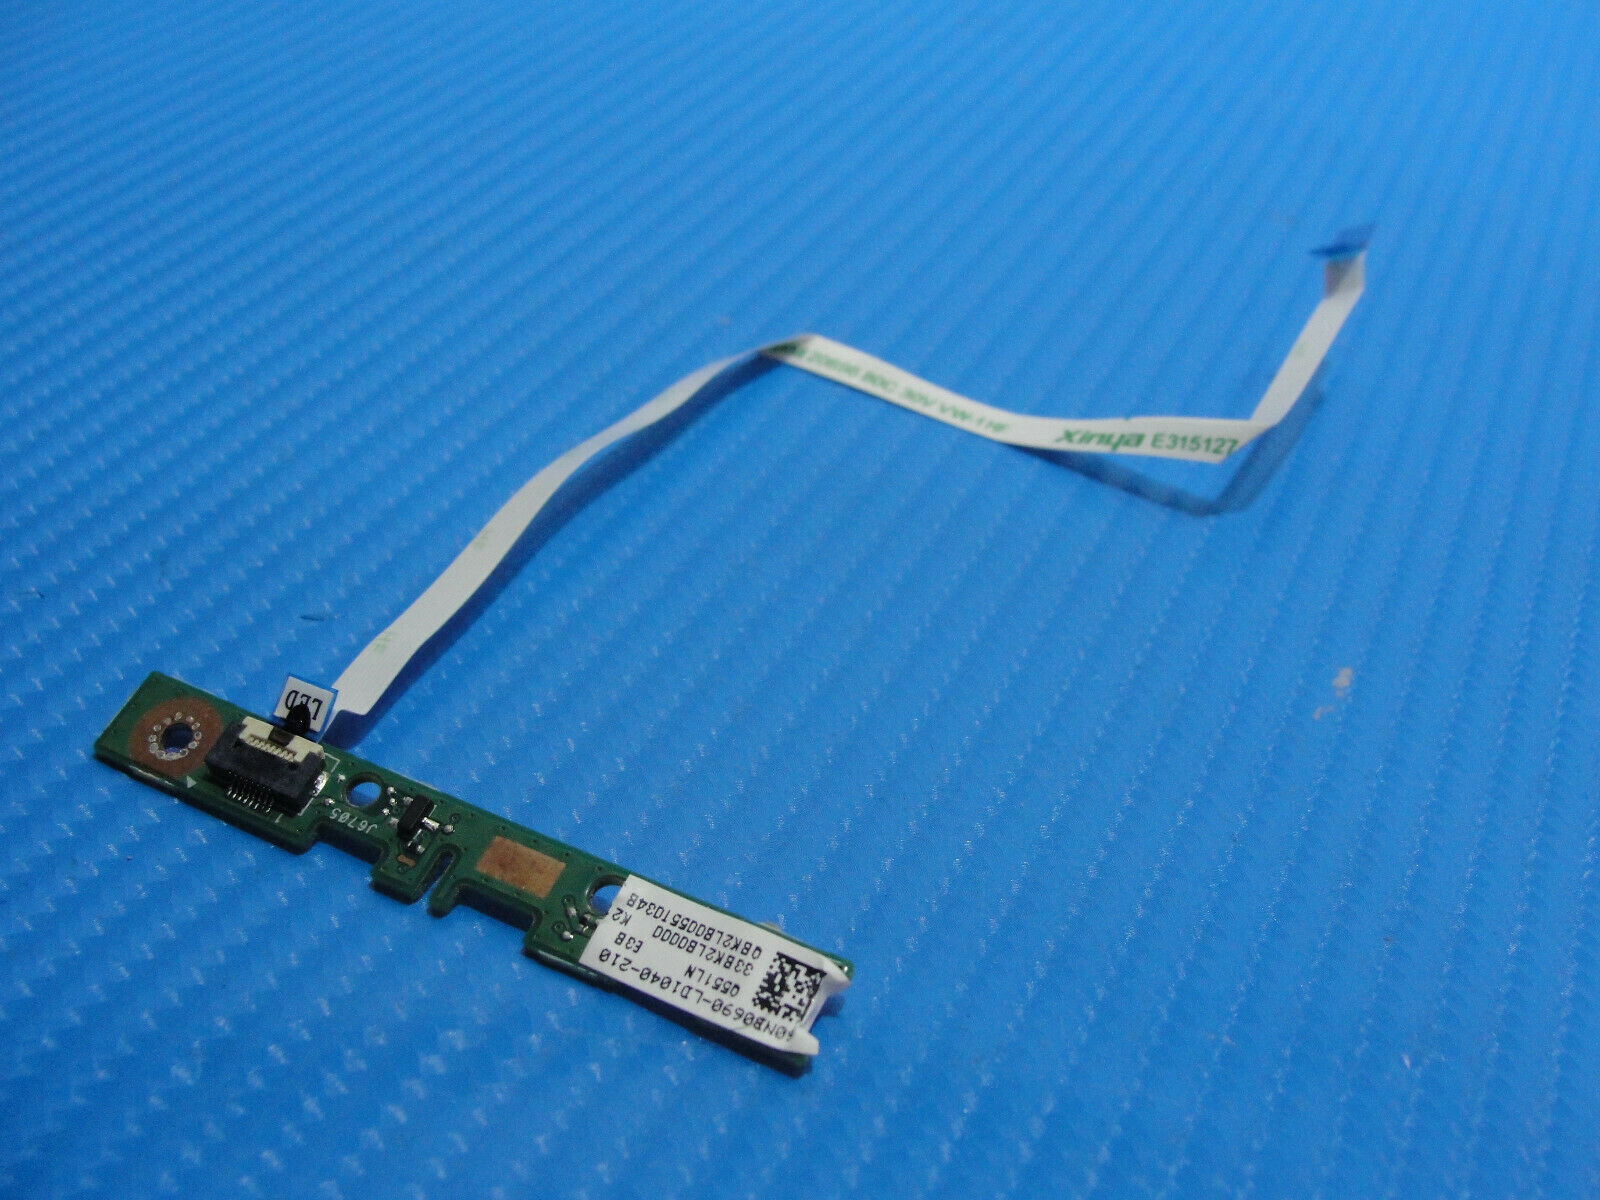 Asus Q551LN-BSI708 15.6" Genuine Laptop LED Board w/Cable 60NB0690-LD1040 ASUS